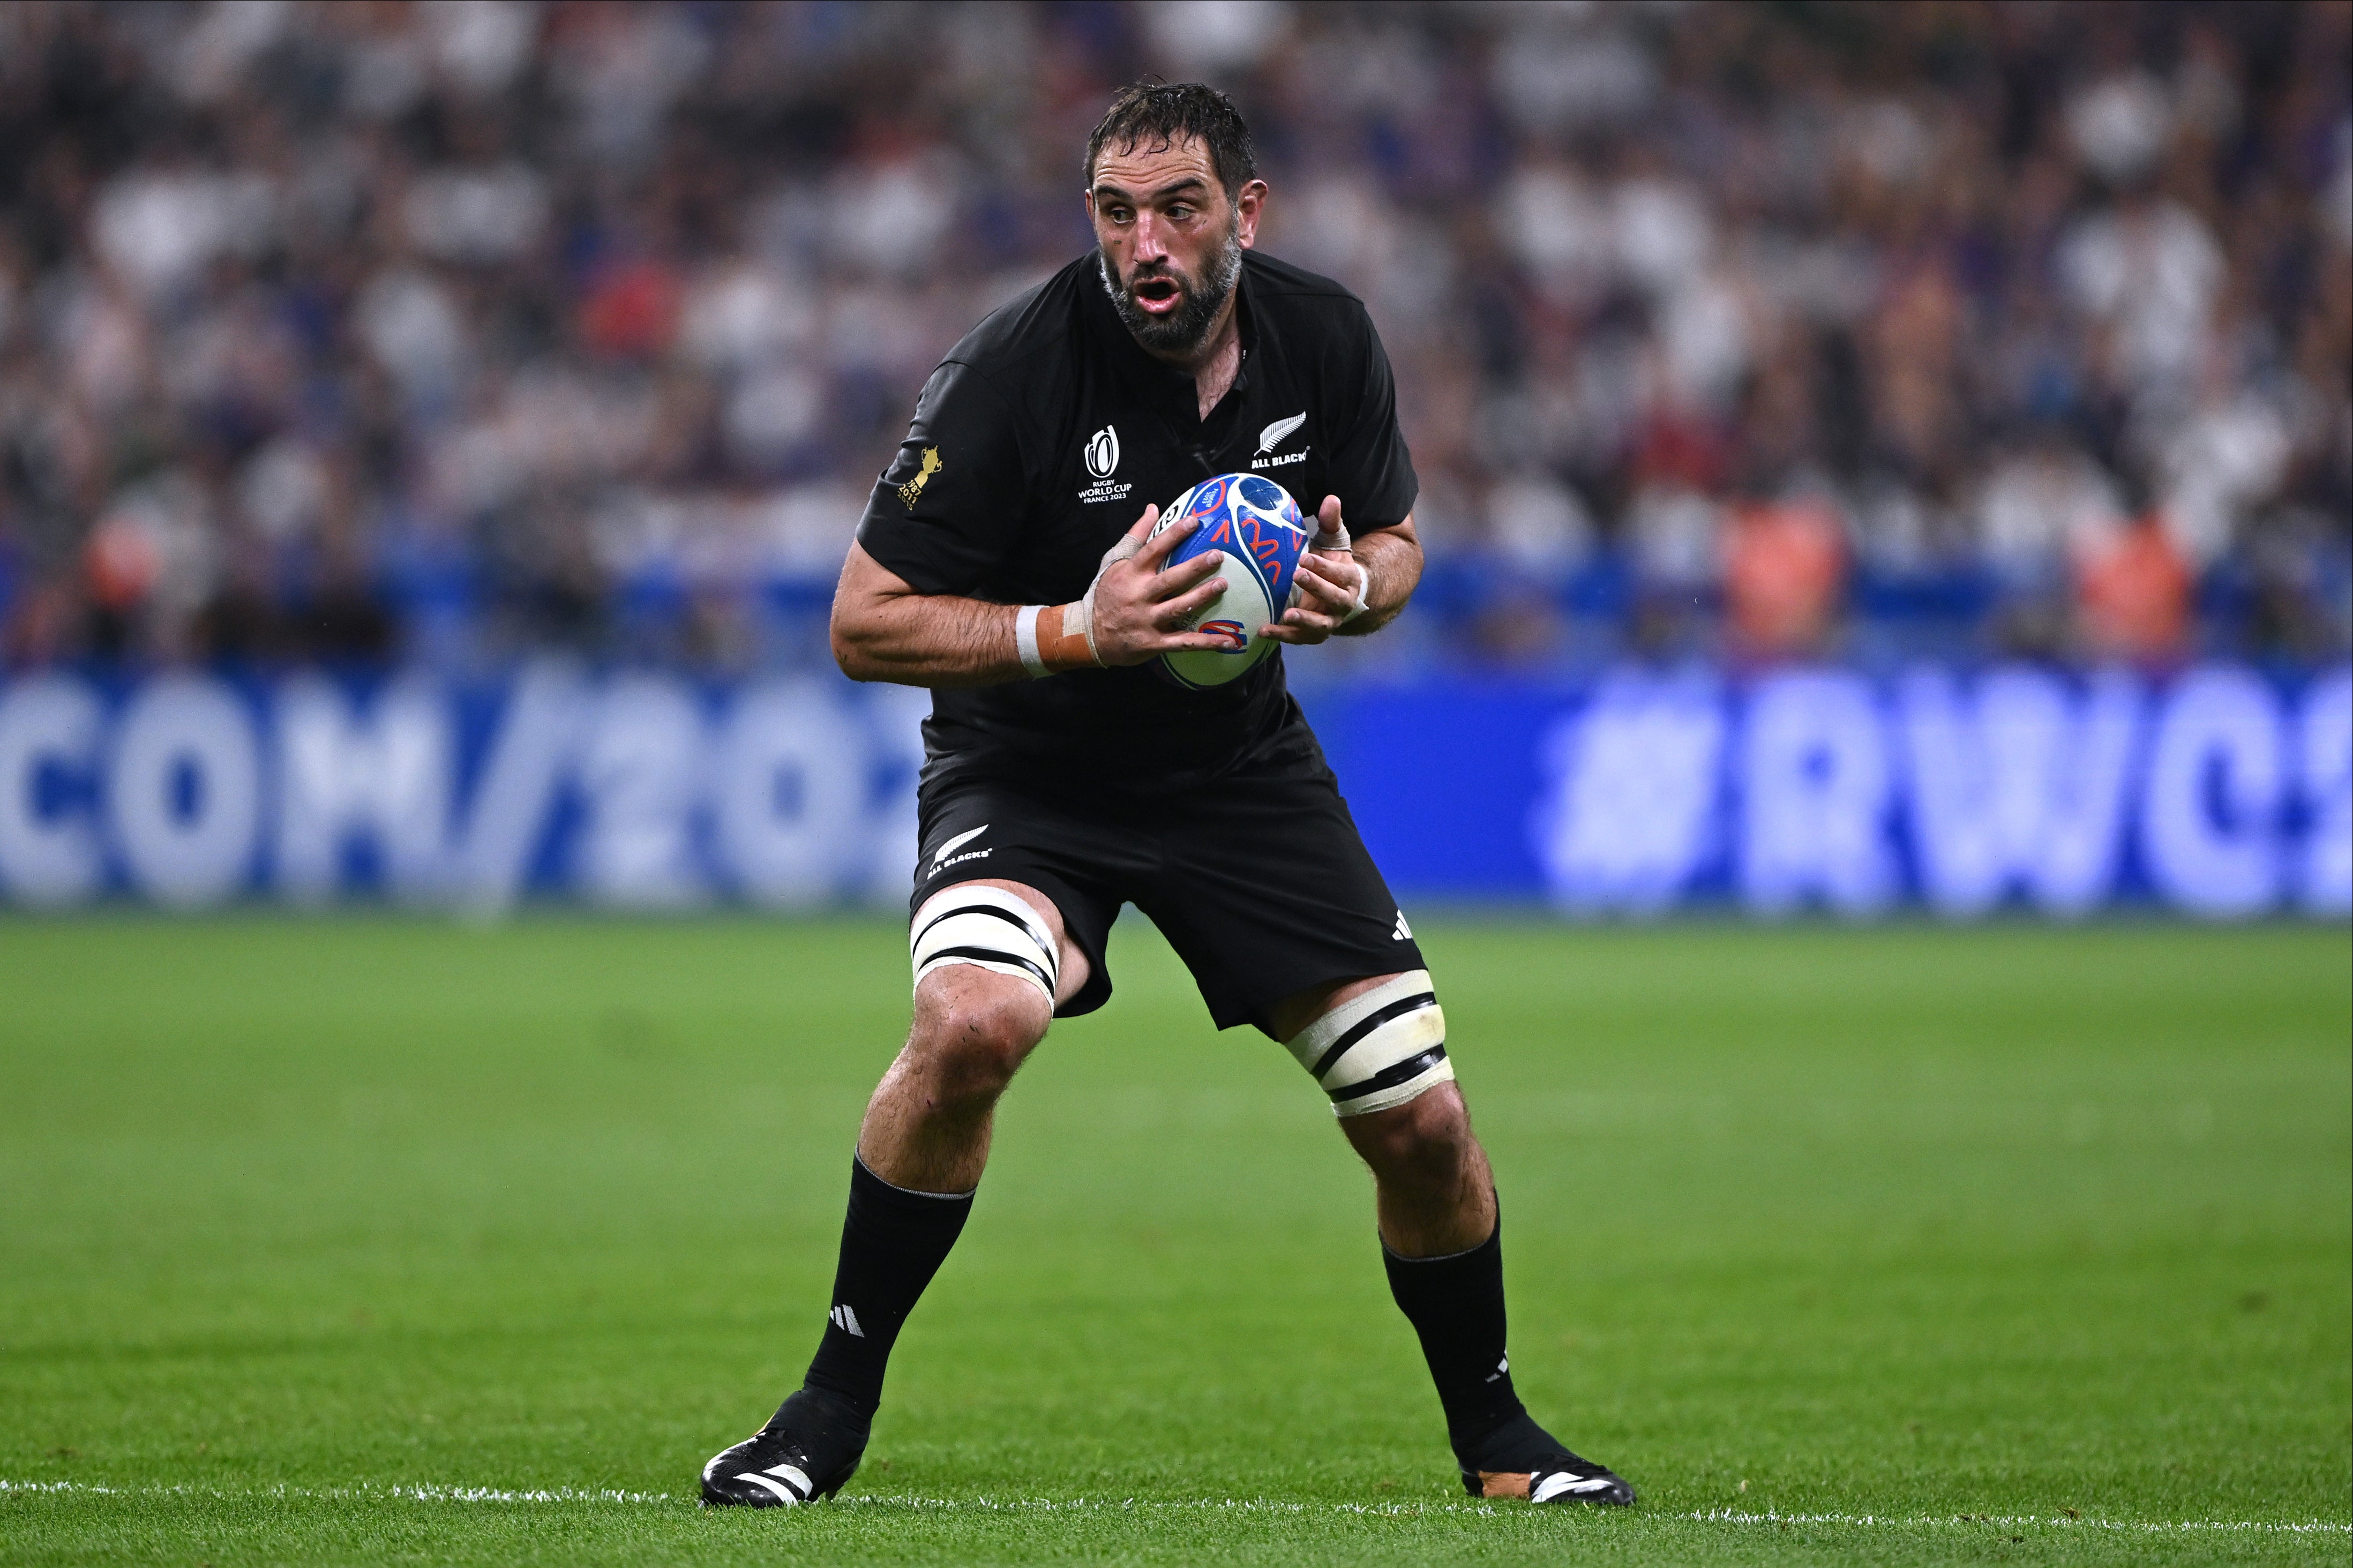 Veteran lock Sam Whitelock is set to become the All Blacks’ most capped international player